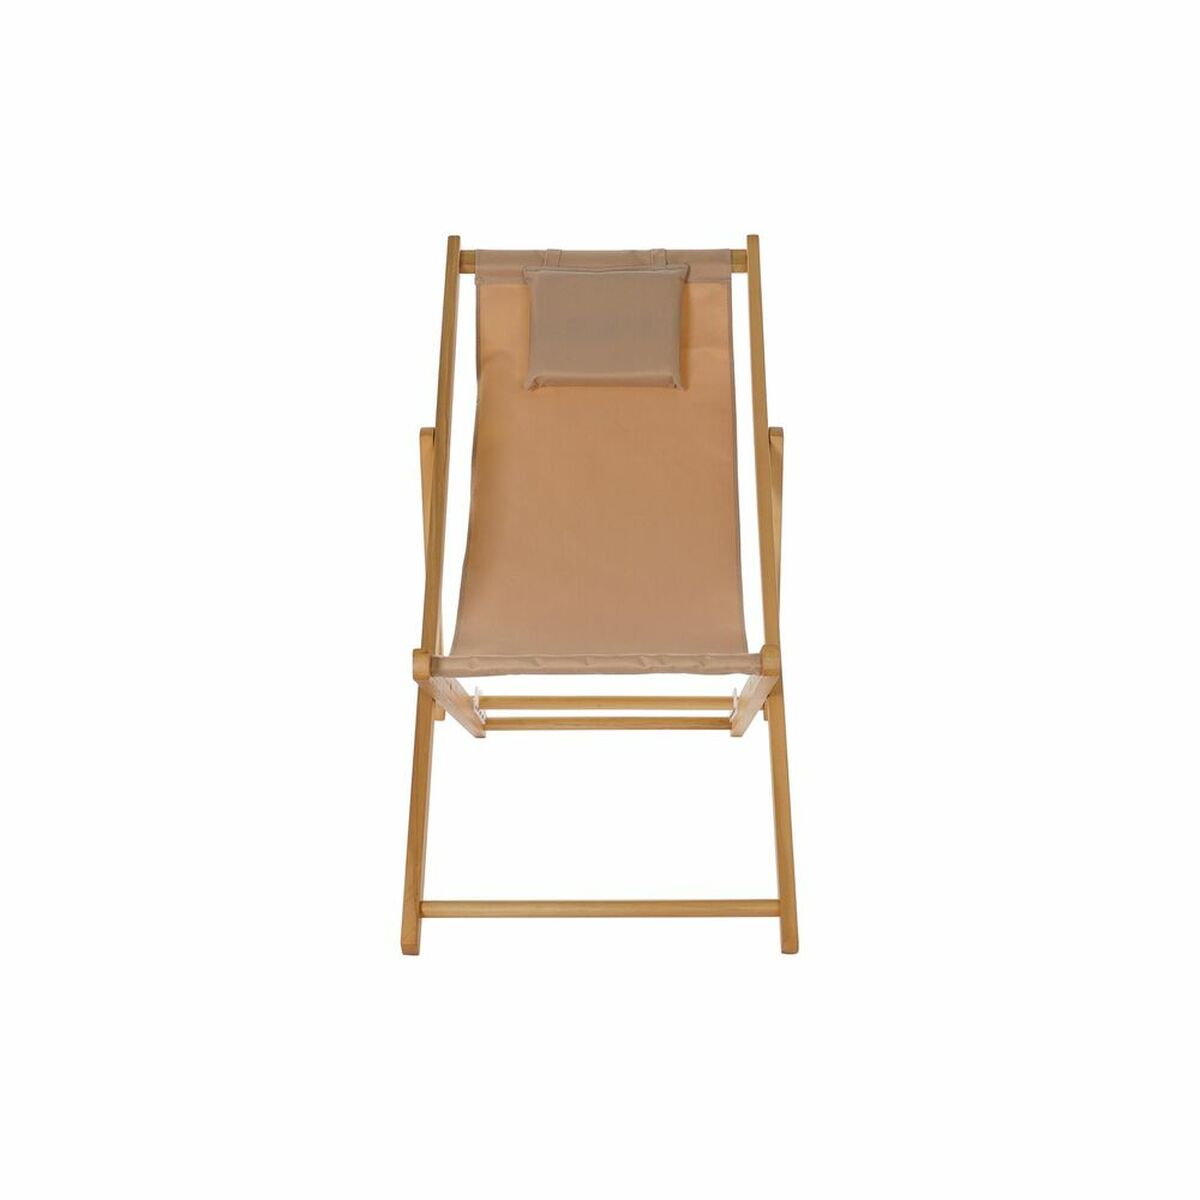 Sun-lounger DKD Home Decor Brown Natural Polyester MDF (57,5 x 113 x